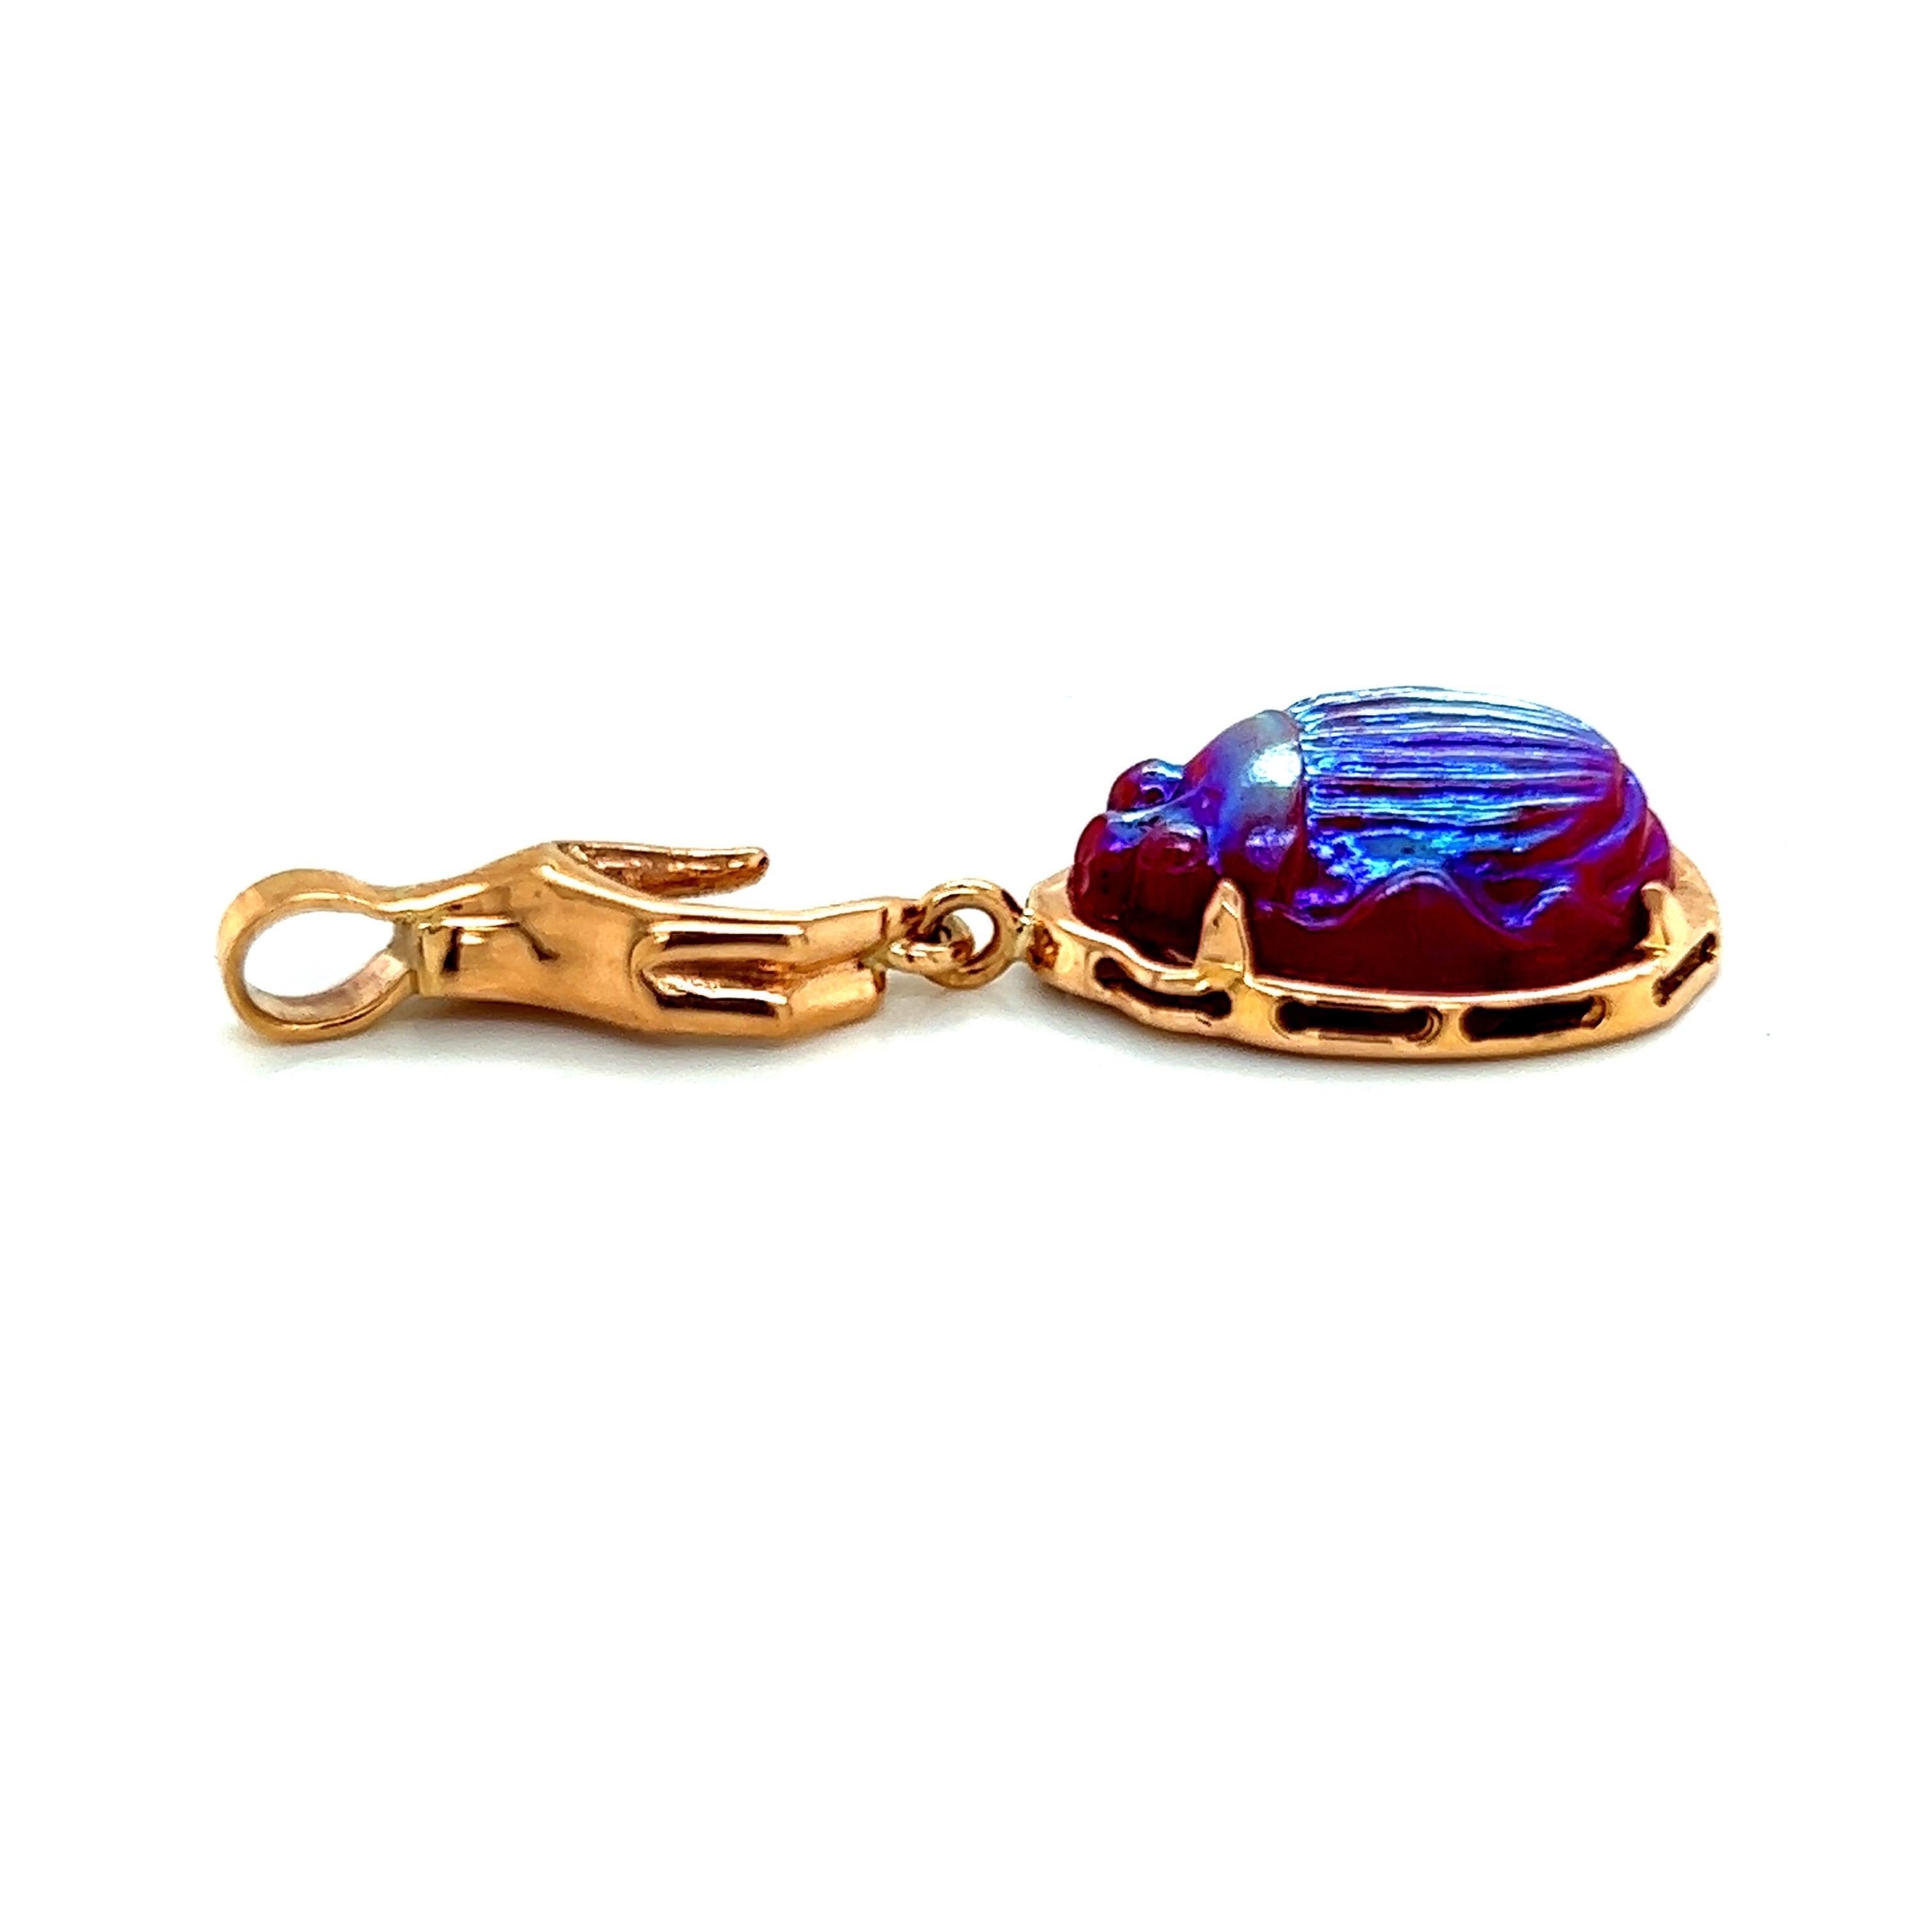 The 18k Pink Gold Pendant with a Hand holding a red iridescent vintage Tiffany glass scarab is a truly unique and striking piece of jewelry. The pendant is crafted from high-quality 18 karat pink gold, giving it a warm and luxurious tone that